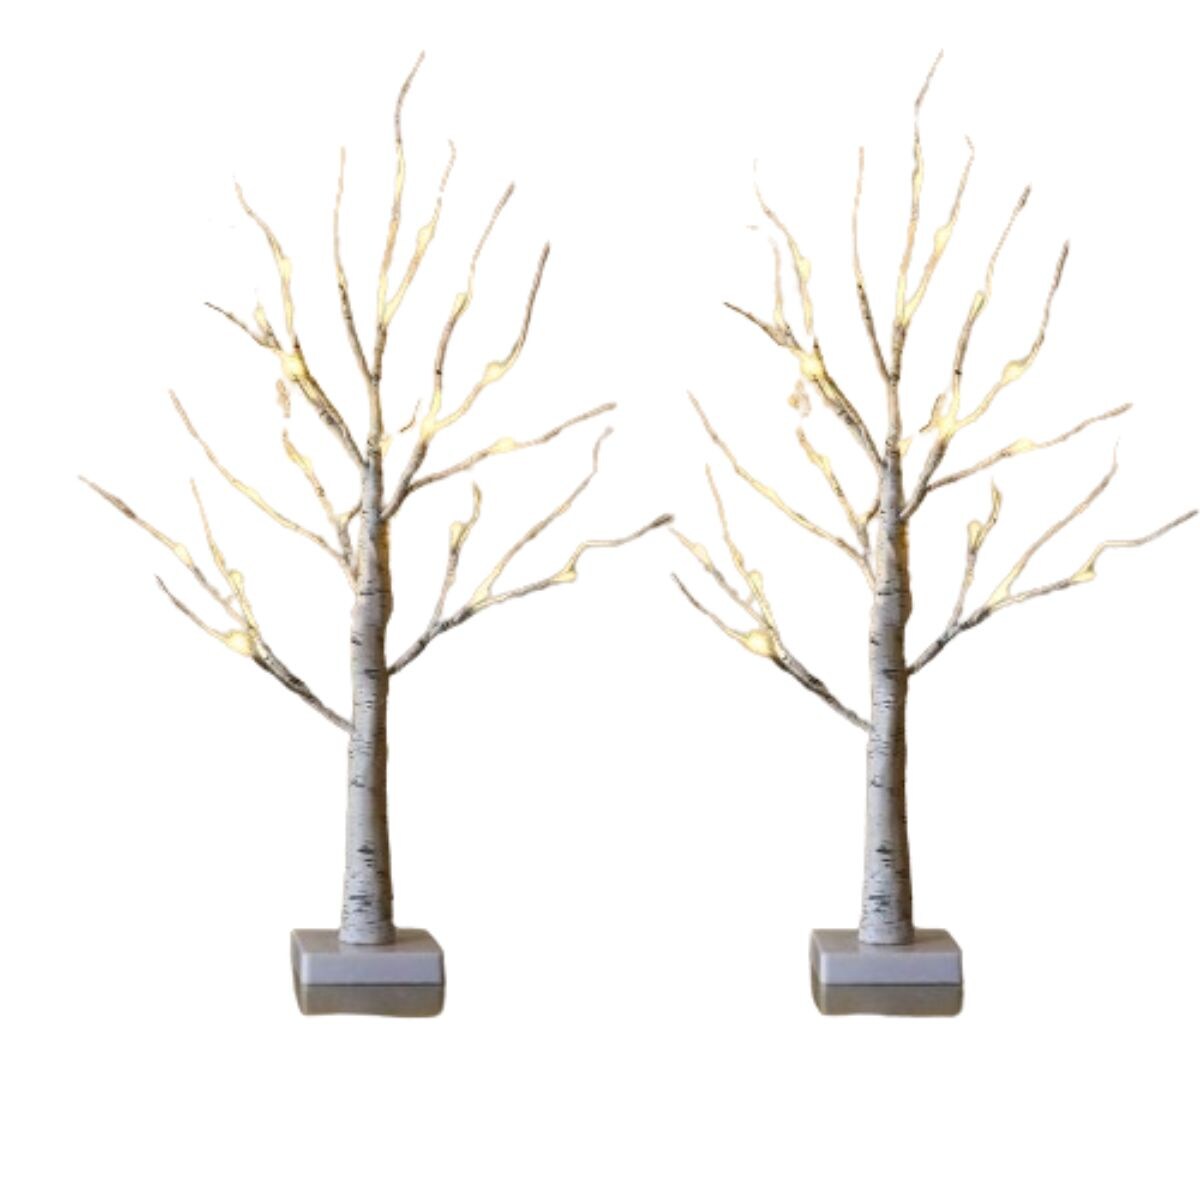 Lighted Birch Tree for Home Decorations Set of 2